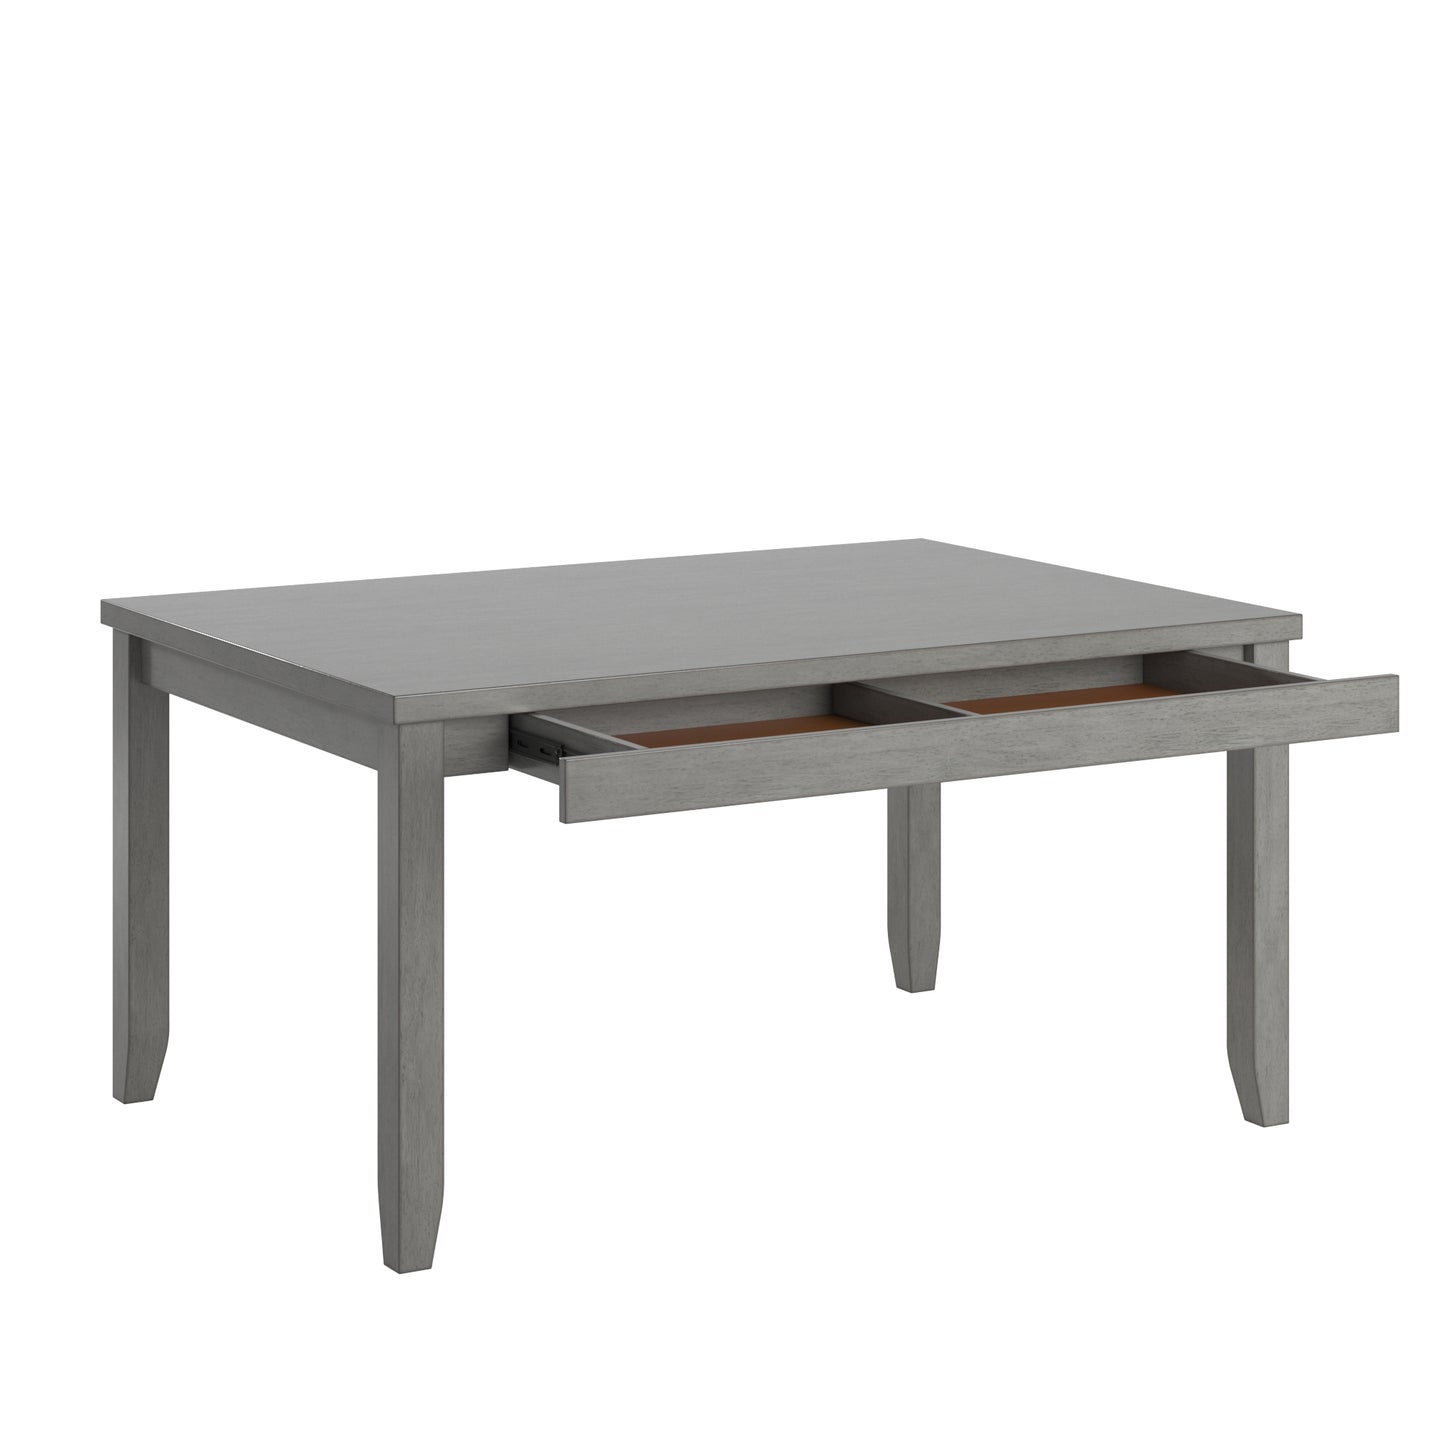 Wood 7-Piece Dining Set with Two Drawers - Grey Finish, Double X Back